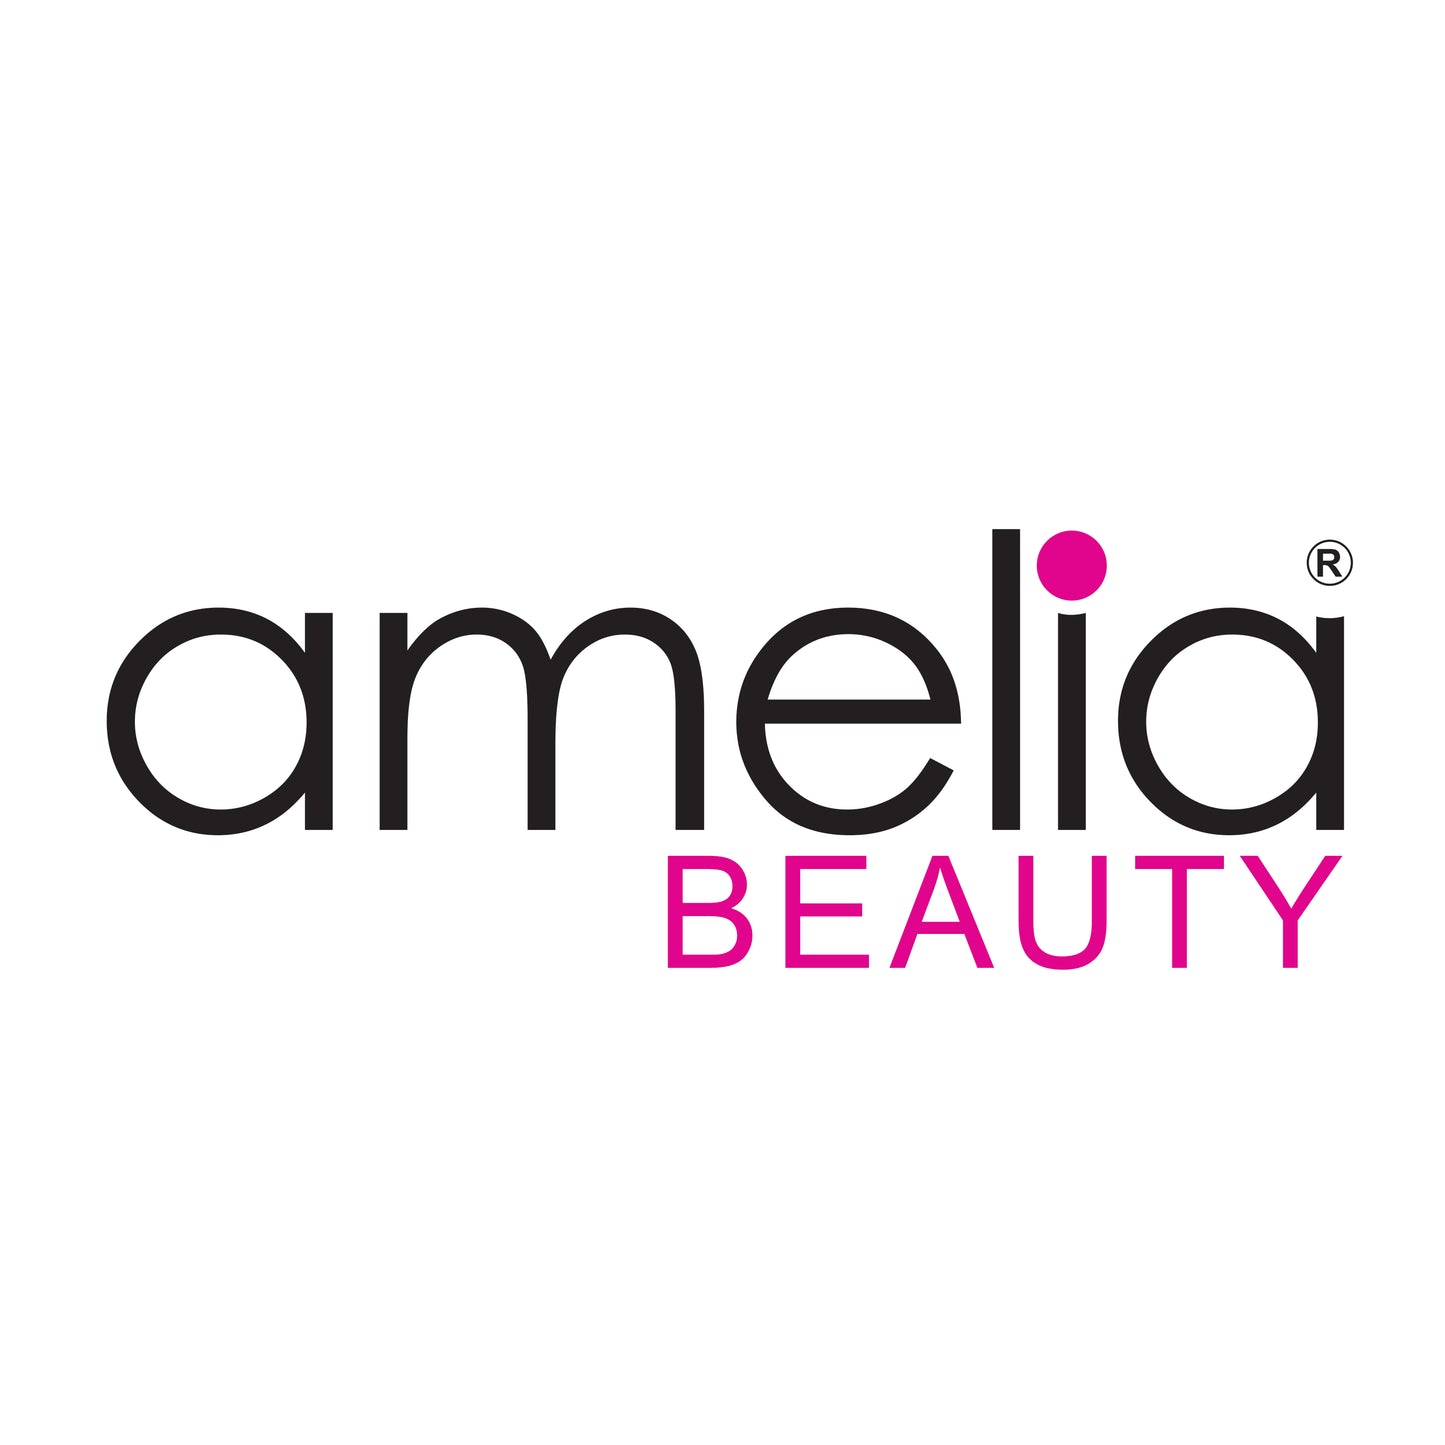 Amelia Beauty Products, Tan Scrunchies, 4.5in Diameter, Gentle on Hair, Strong Hold, No Snag, No Dents or Creases. 6 Pack